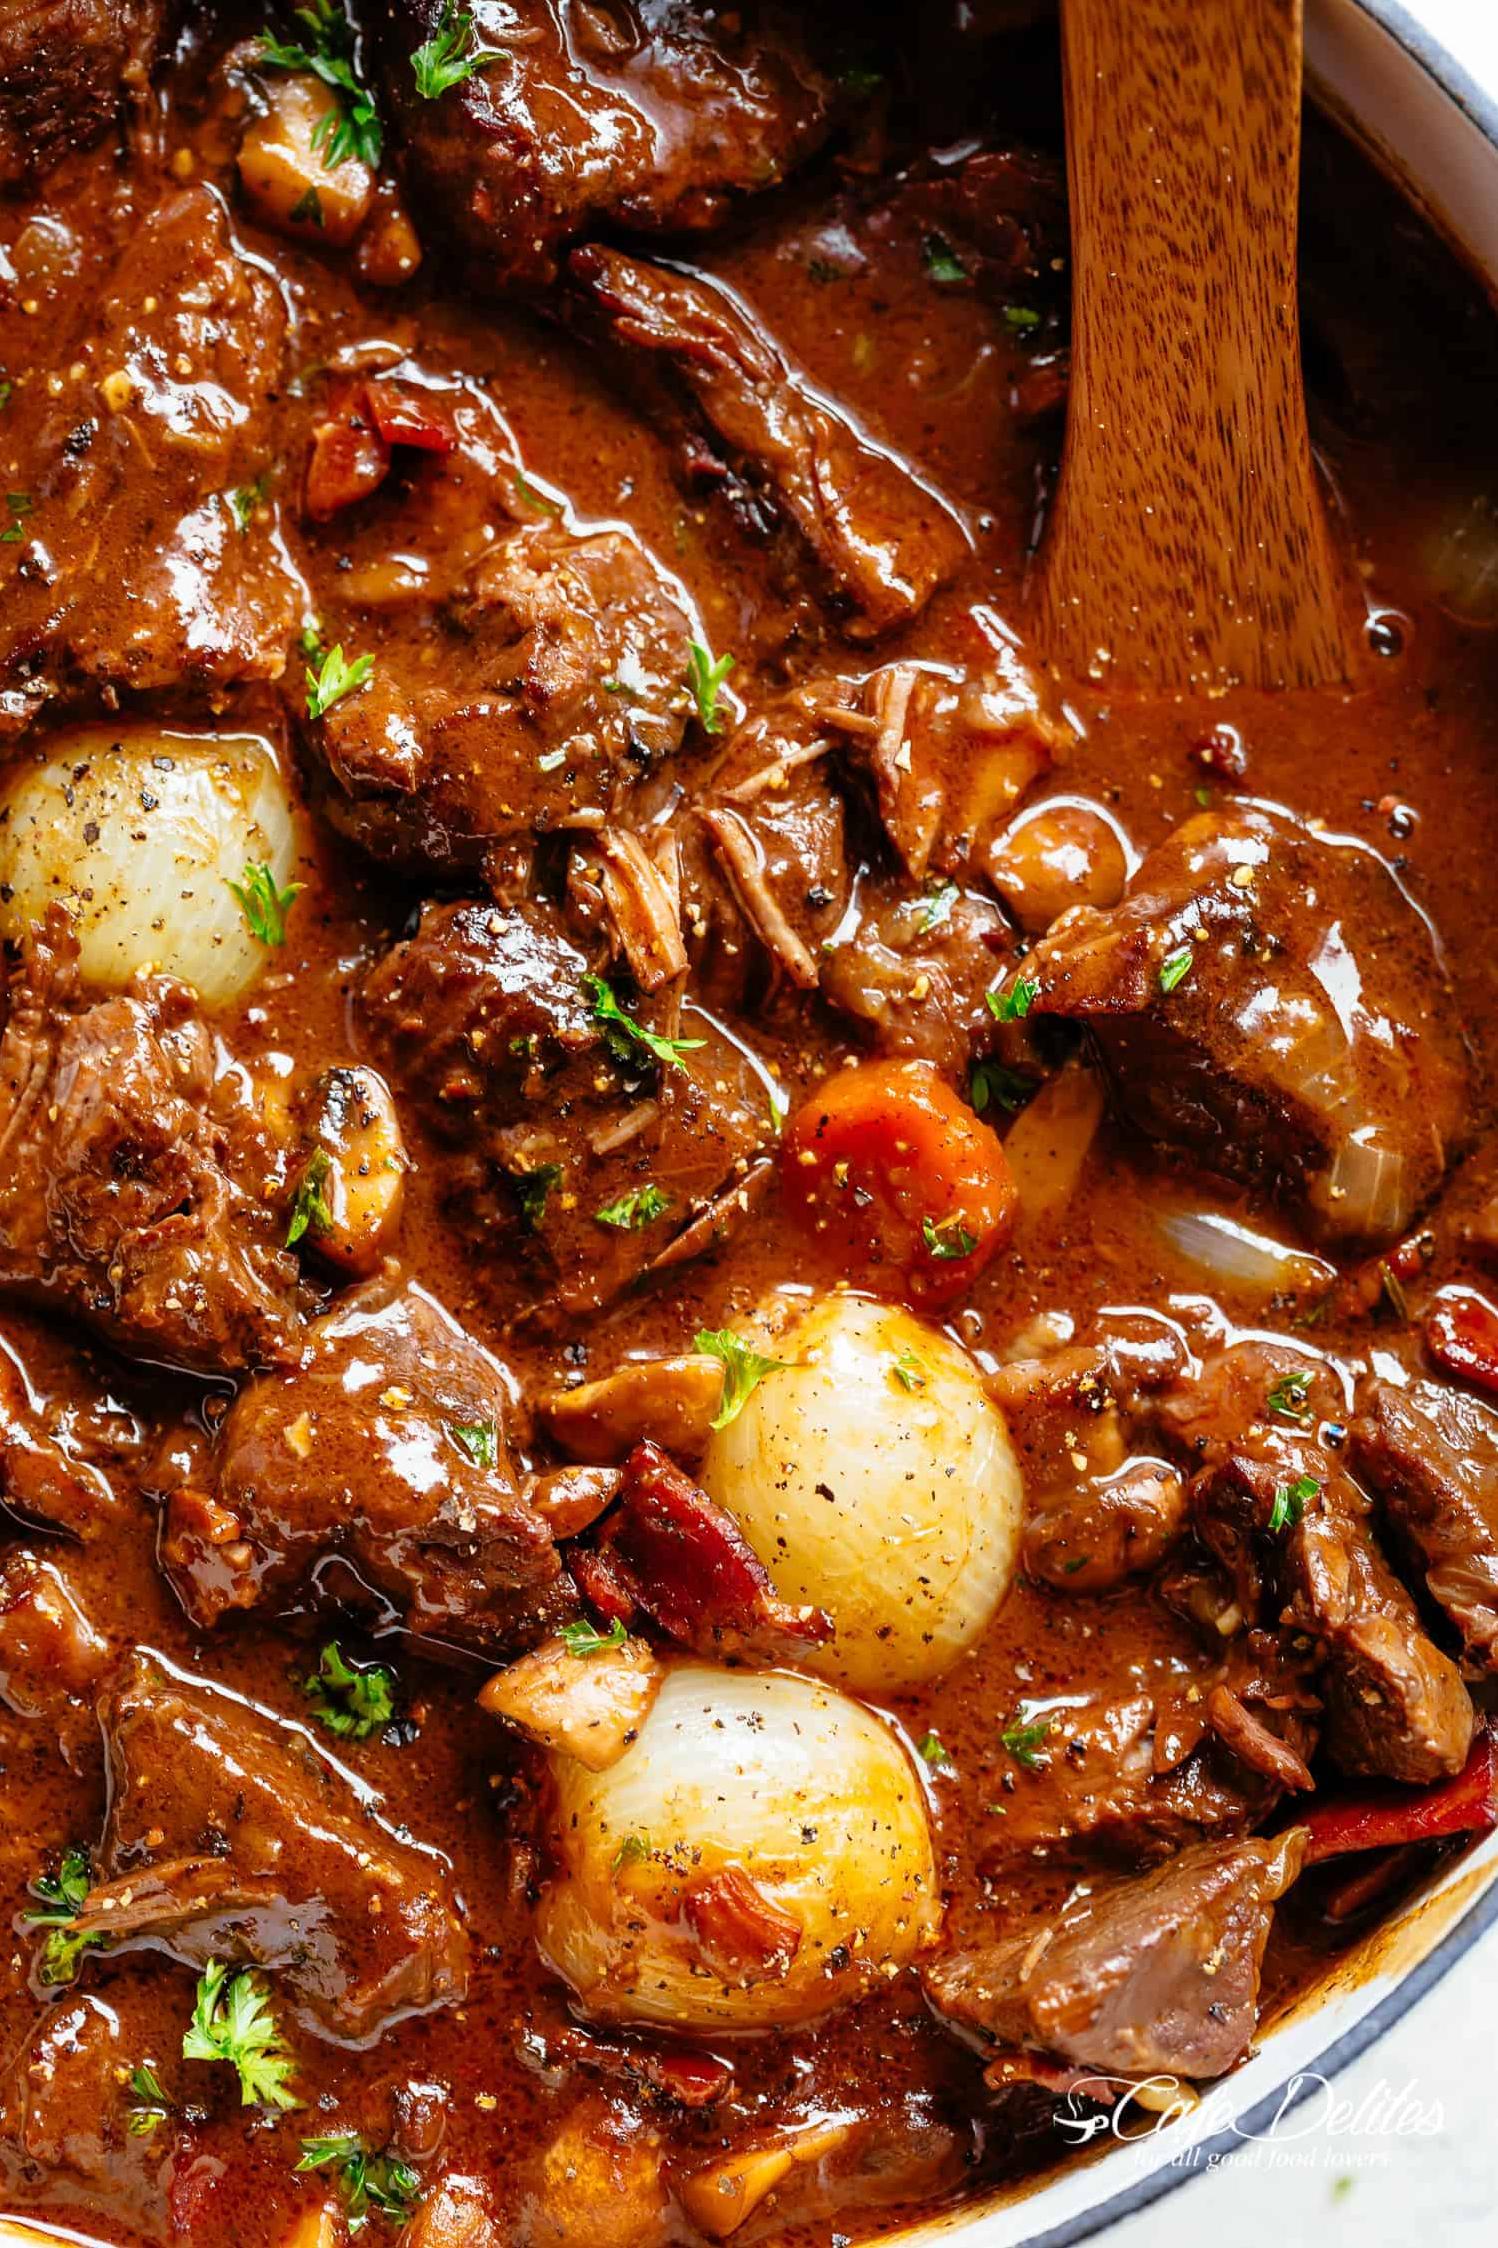  Get ready to fall in love with every spoonful of this hearty beef and red wine casserole.